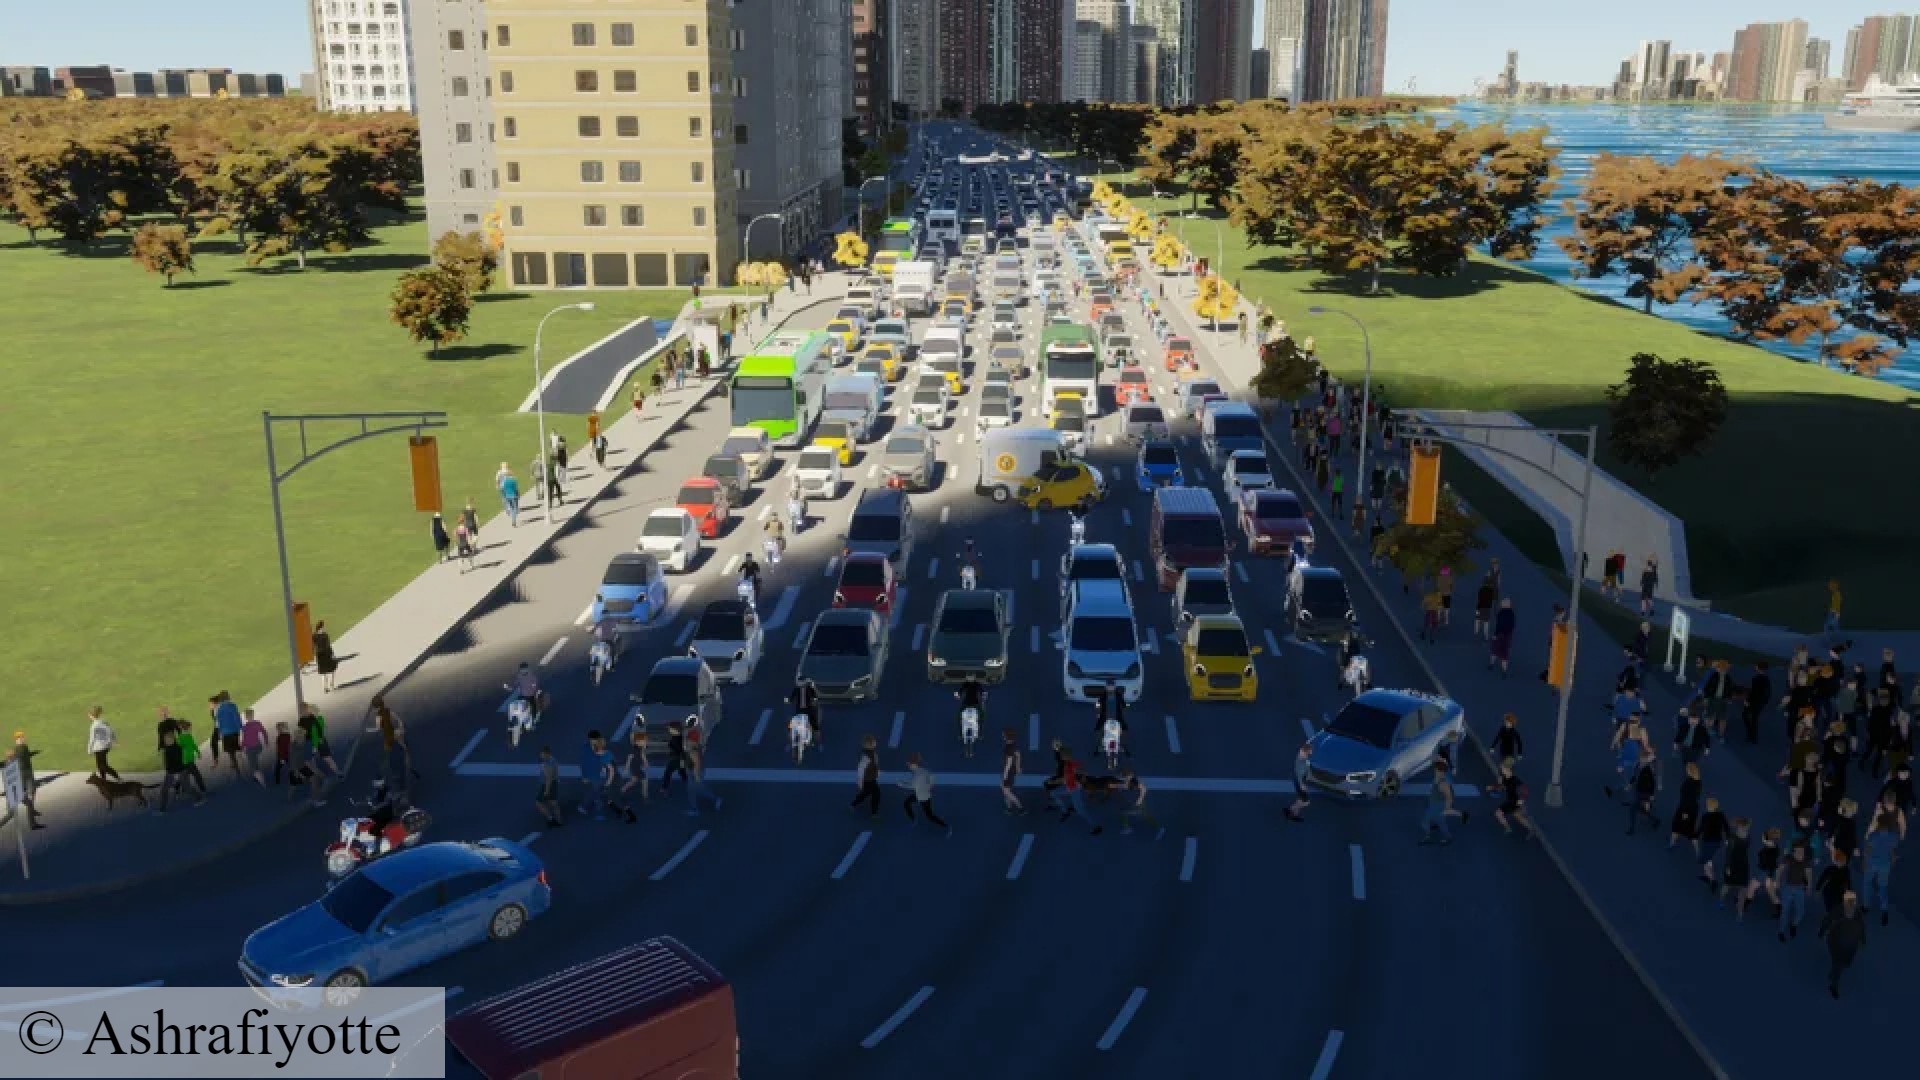 Cities Skylines 2 jaywalking: Pedestrians crowd the street in Colossal Order city building game Cities Skylines 2